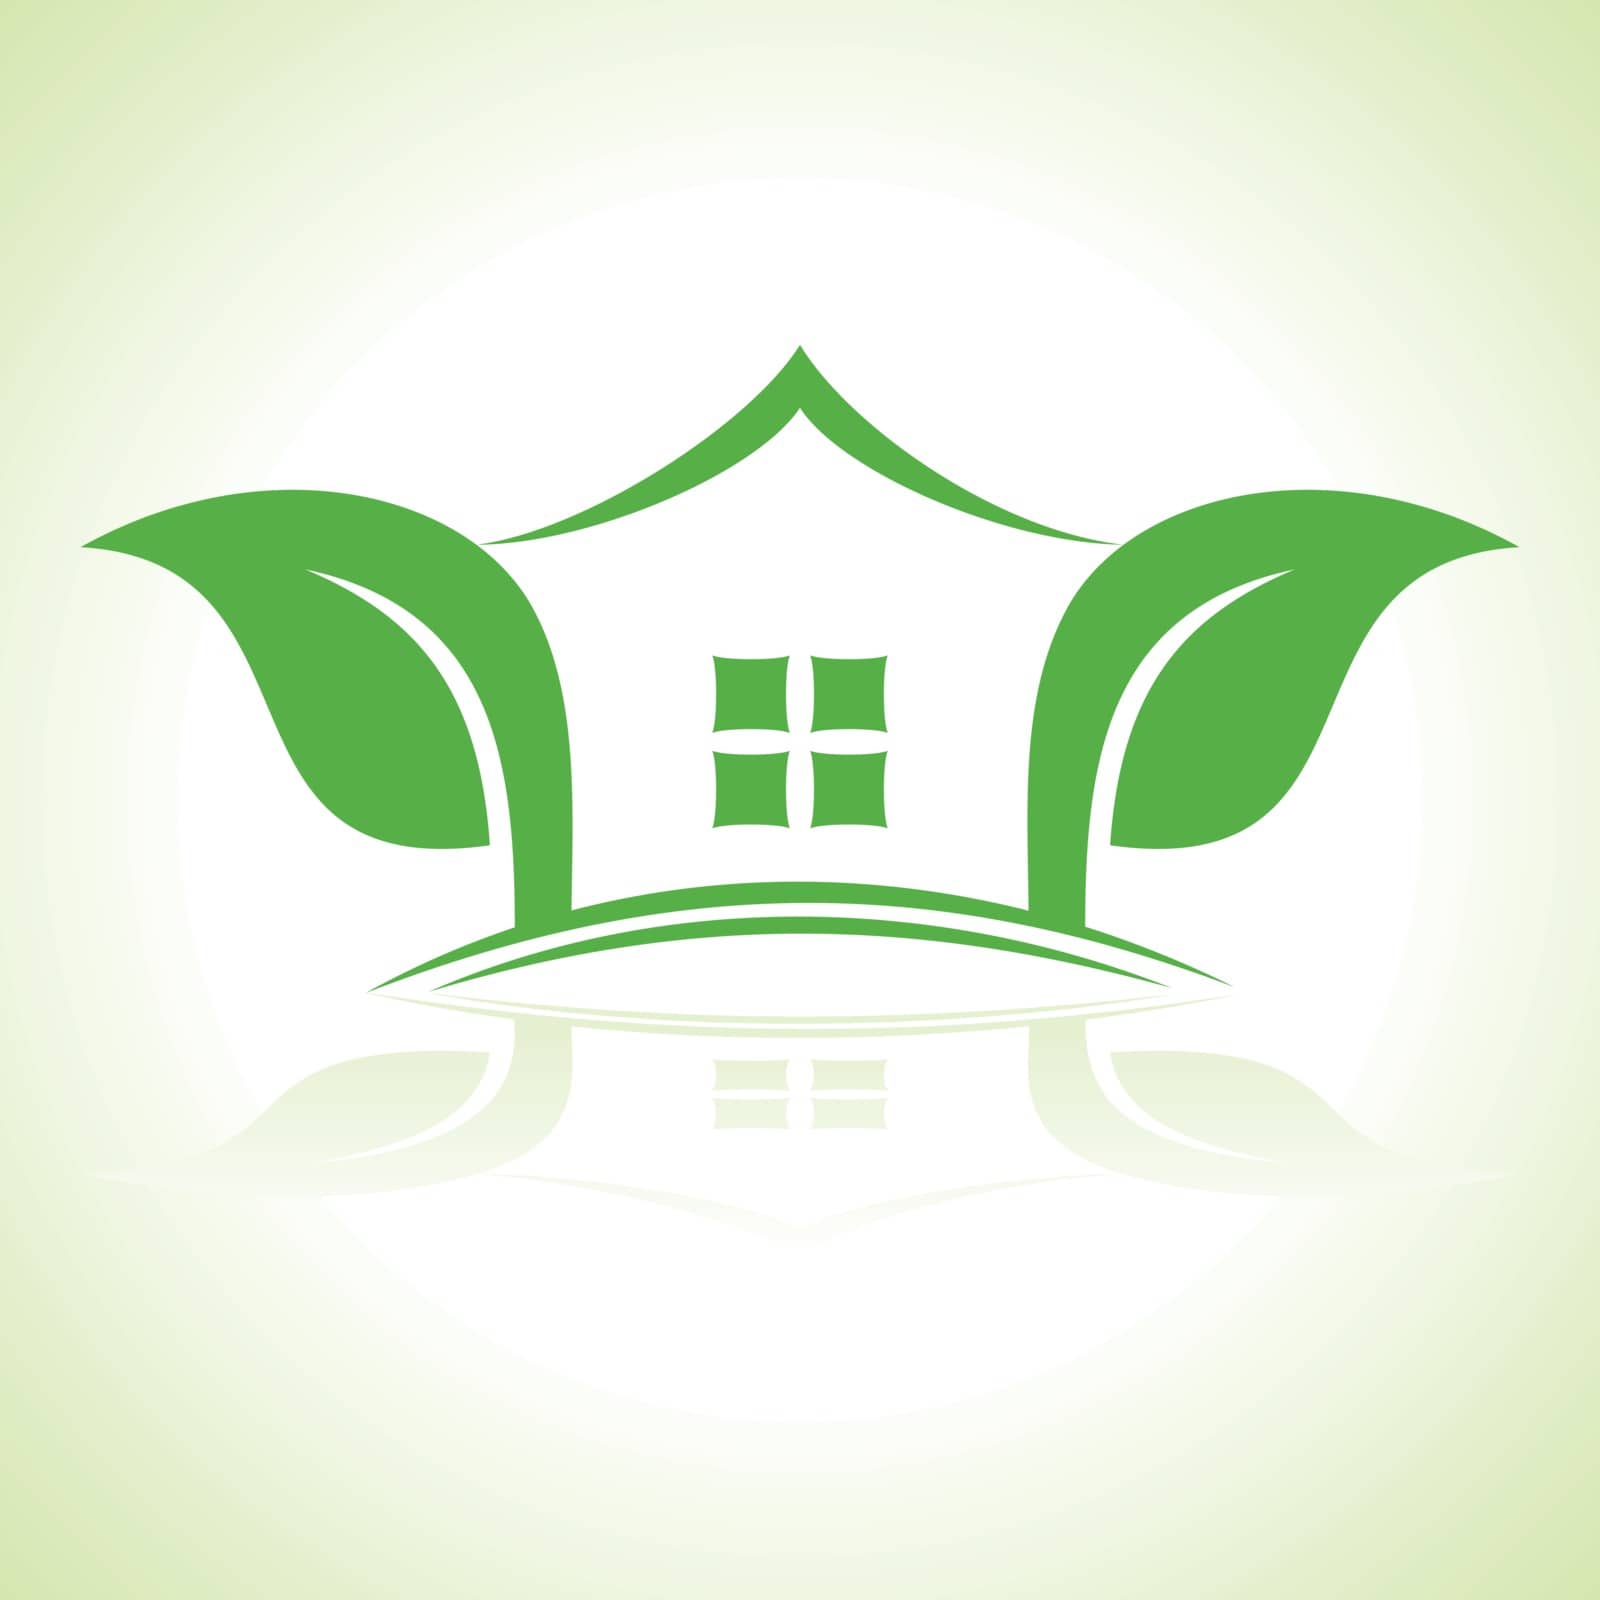 Eco home icon with leaf vector illustration by graphicsdunia4you